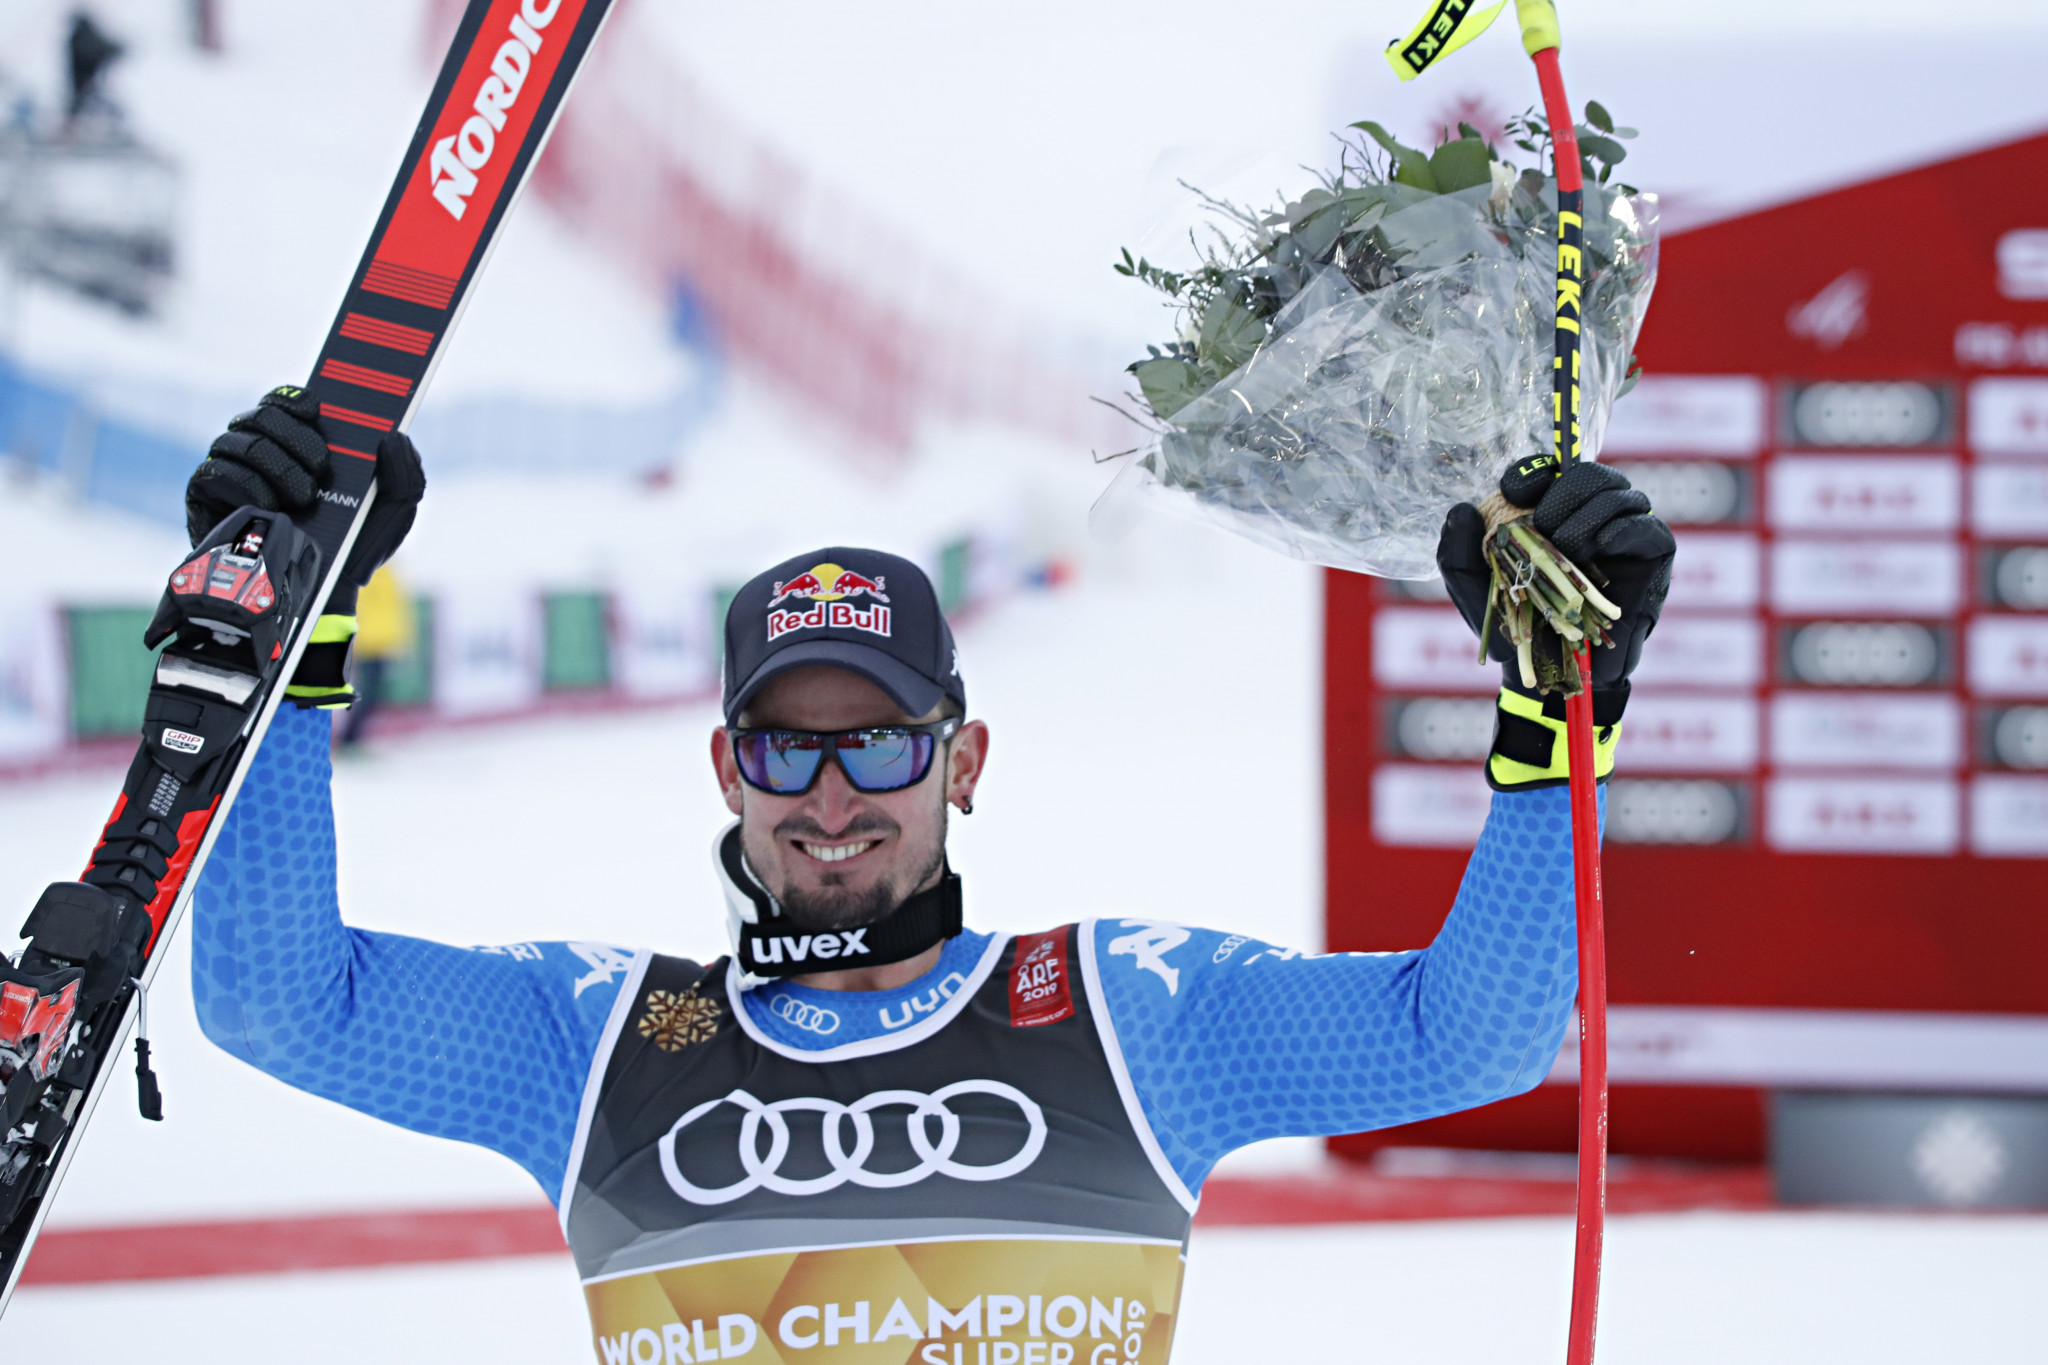 Paris wins world super-G gold amid poor visibility in Åre